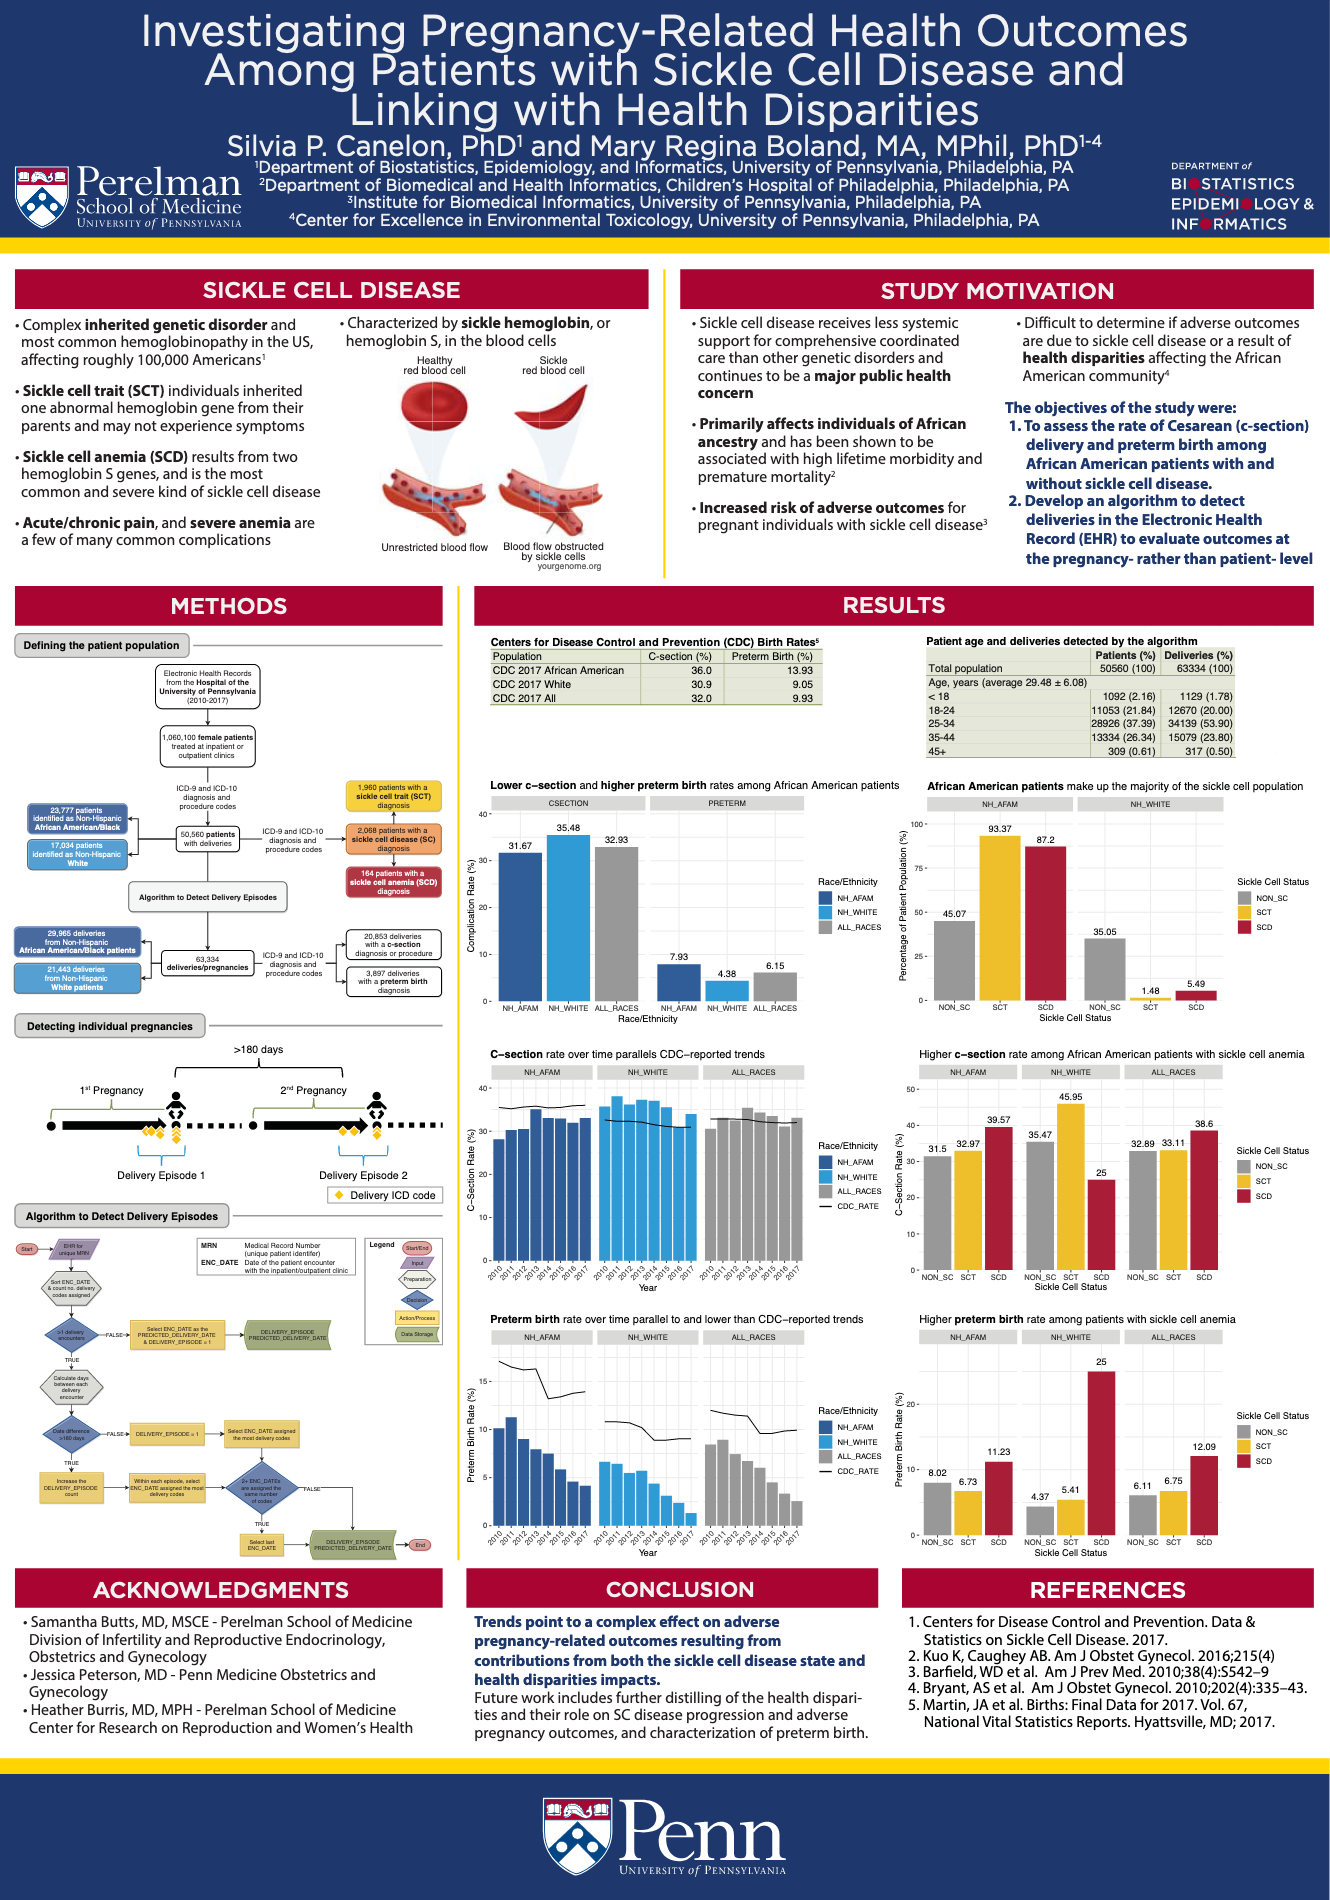 Poster presented at the AMIA 2019 Annual Symposium